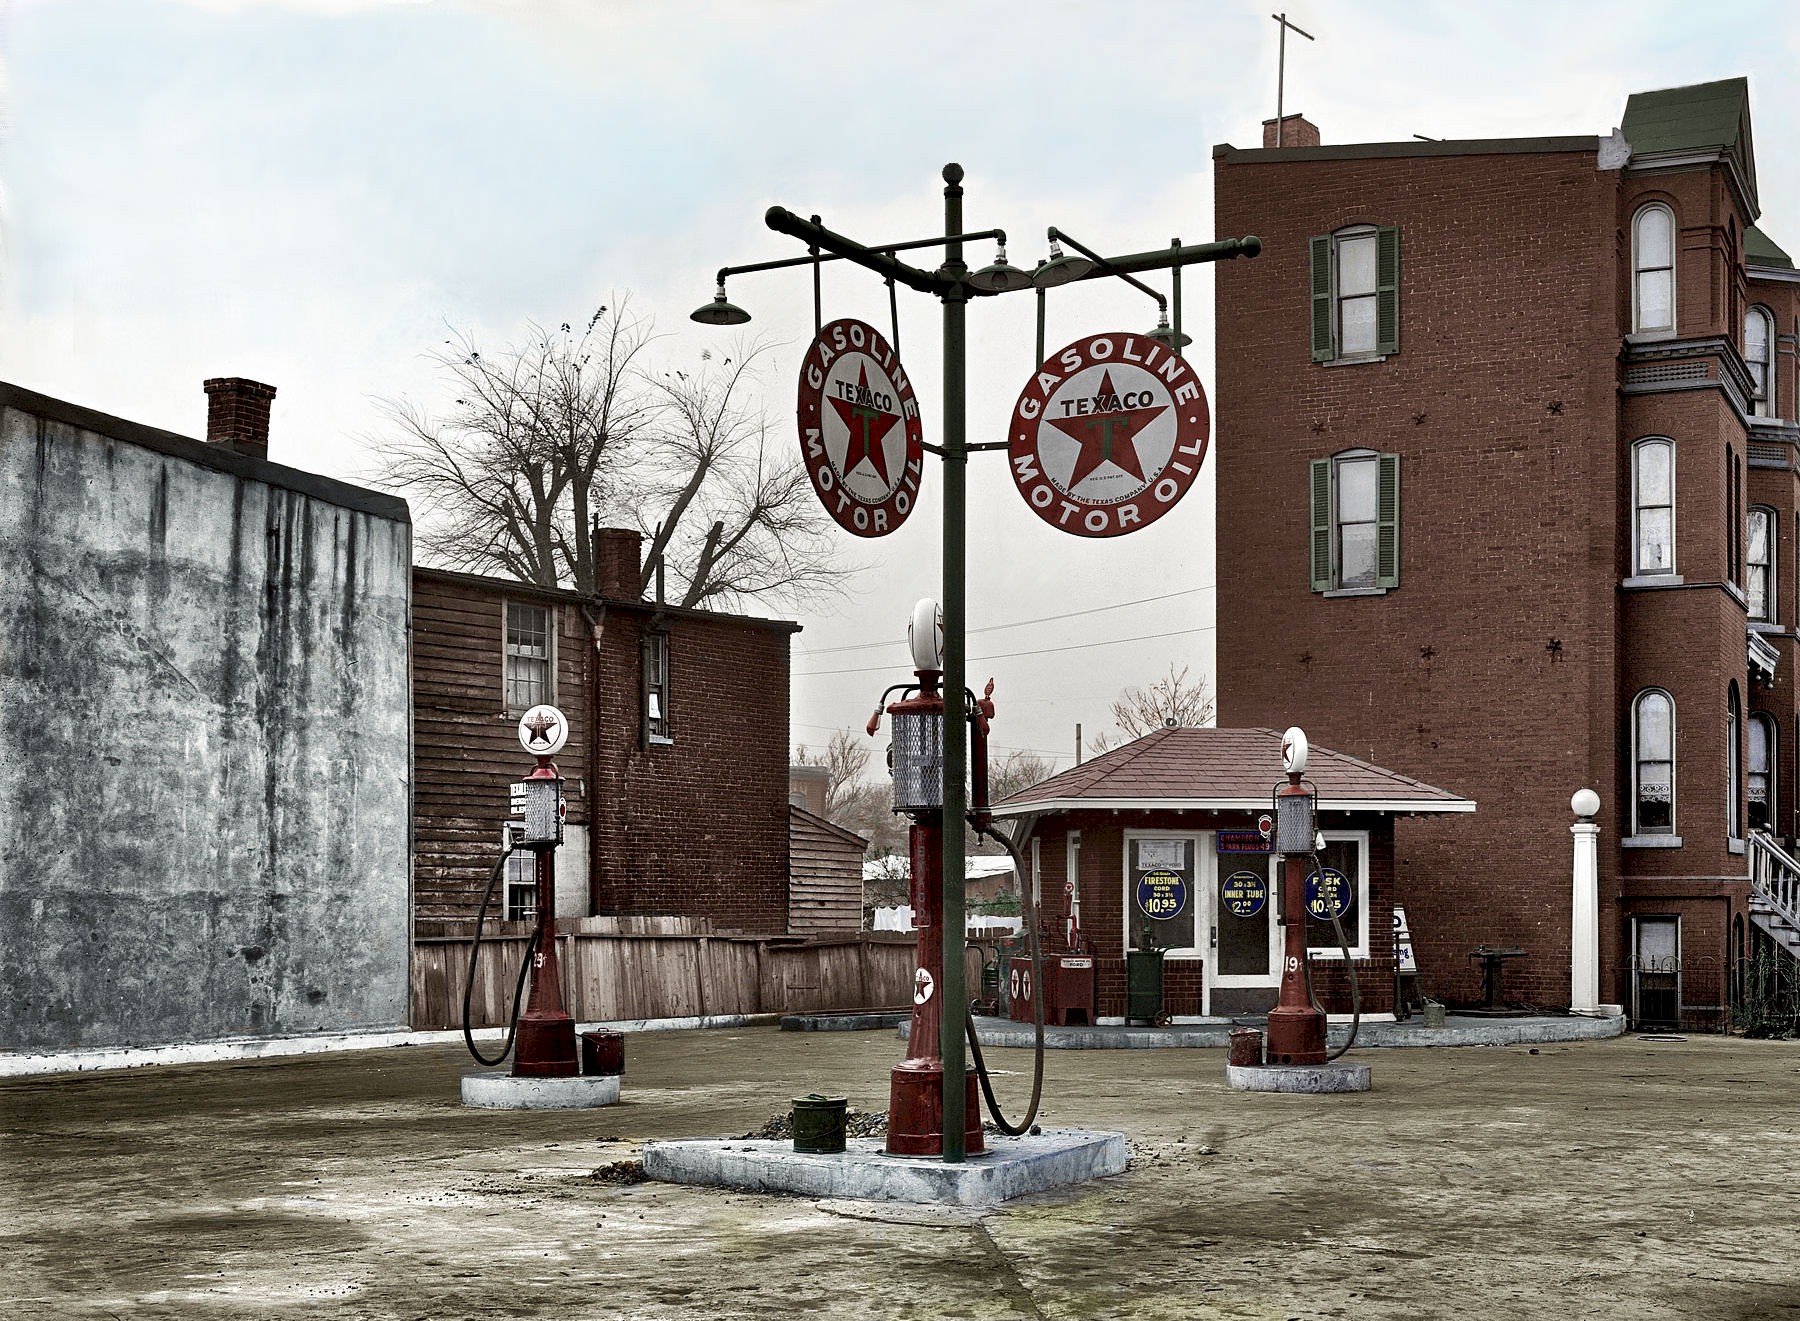 Colorized from this Shorpy original. This is my first attempt at colorizing an image. View full size.